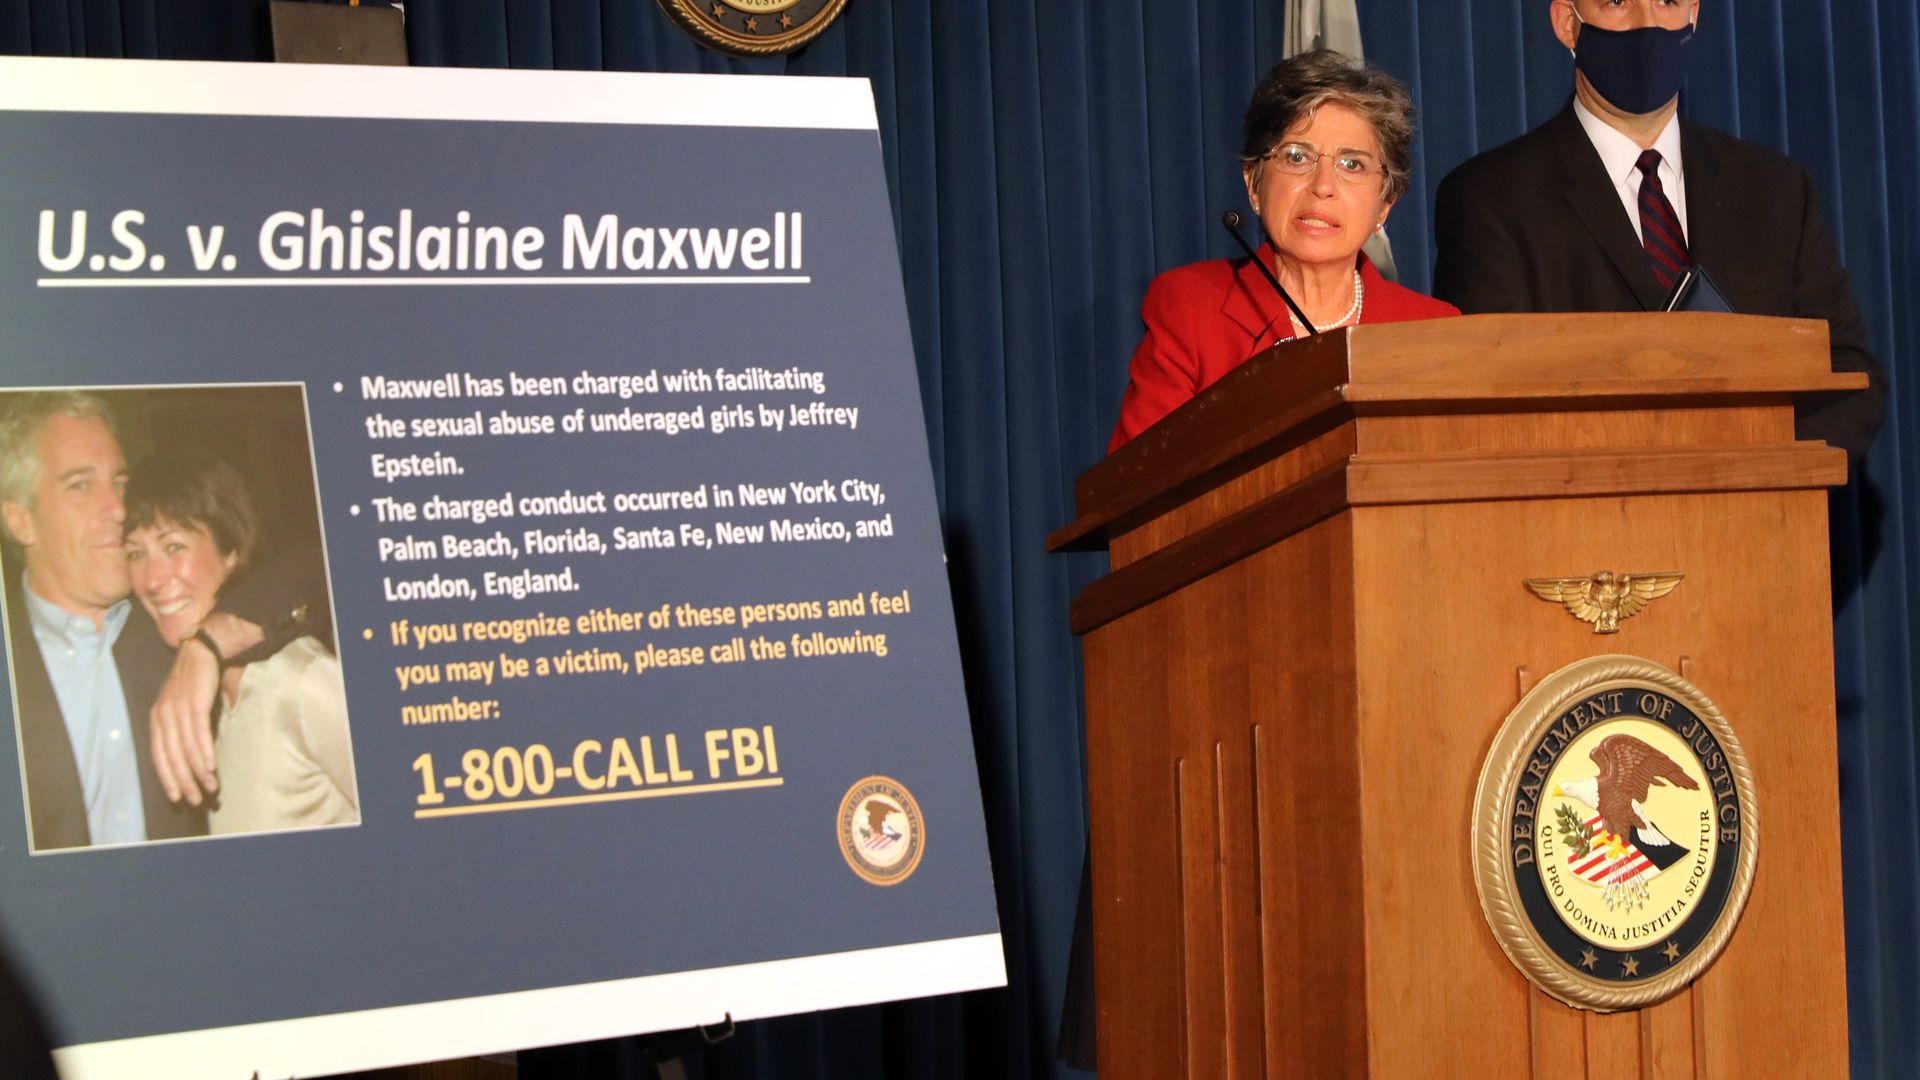 An FBI poster with a photo of Maxwell and Epstein is next to a podium where an official is speaking.